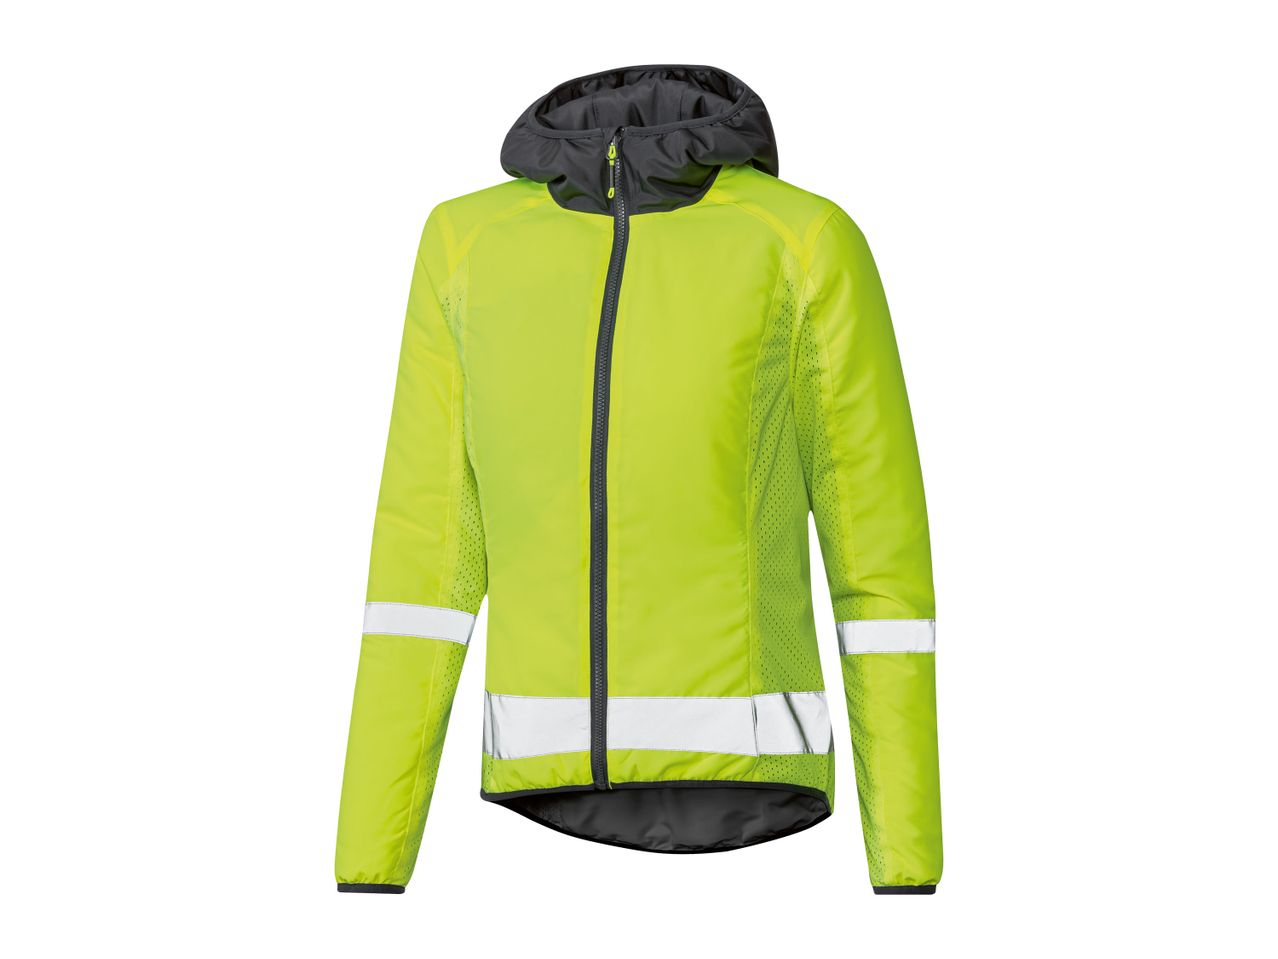 Go to full screen view: Crivit Ladies’ Reversible Cycling Jacket - Image 5